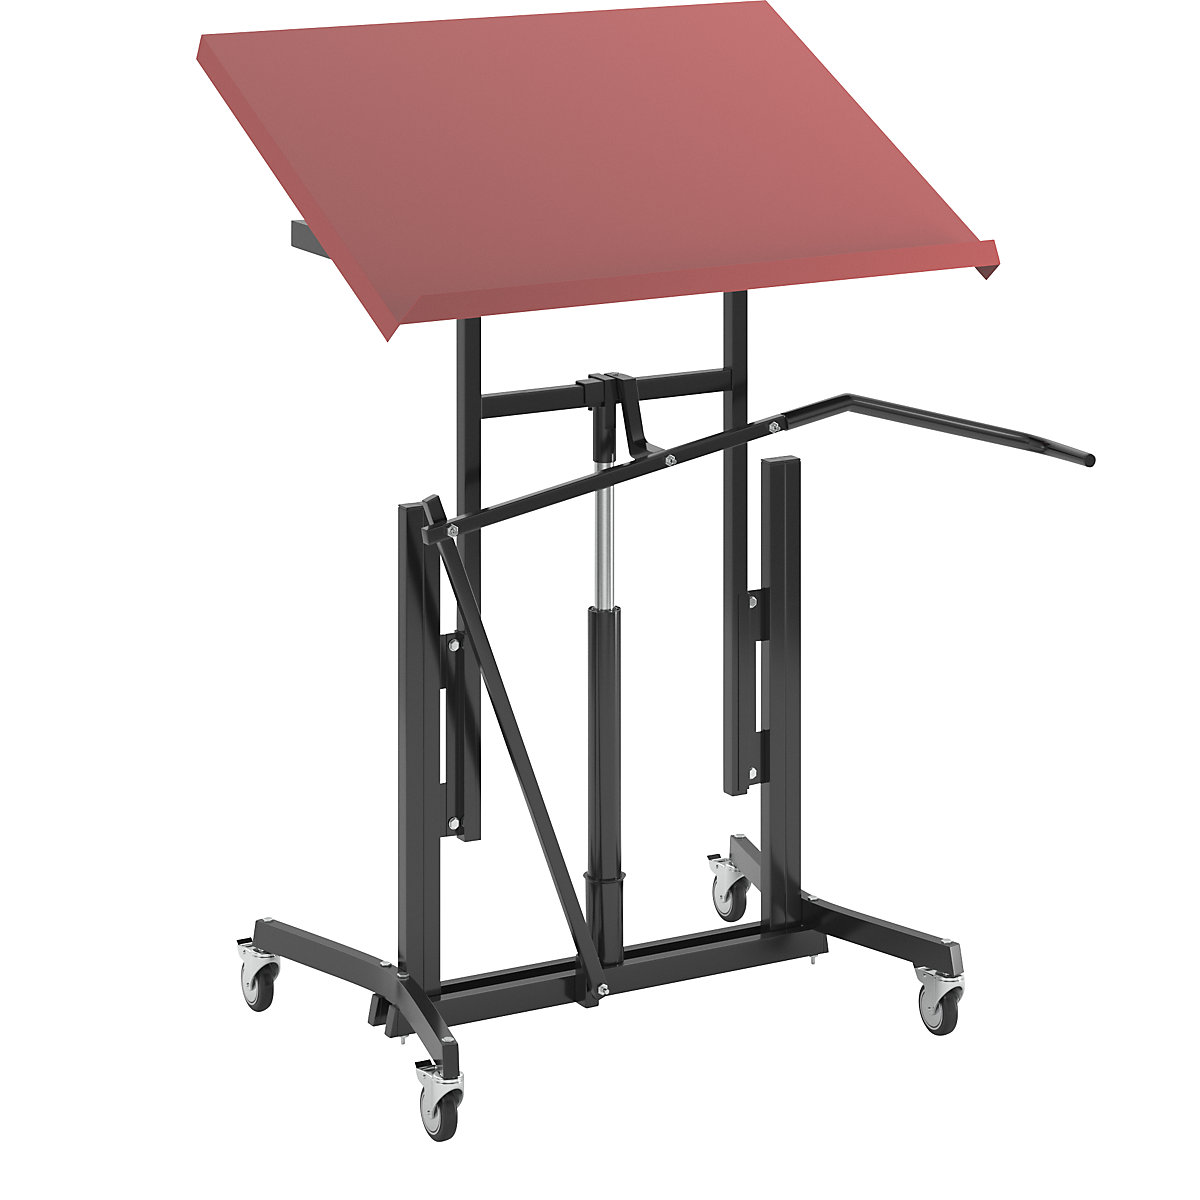 XL material stand, mobile